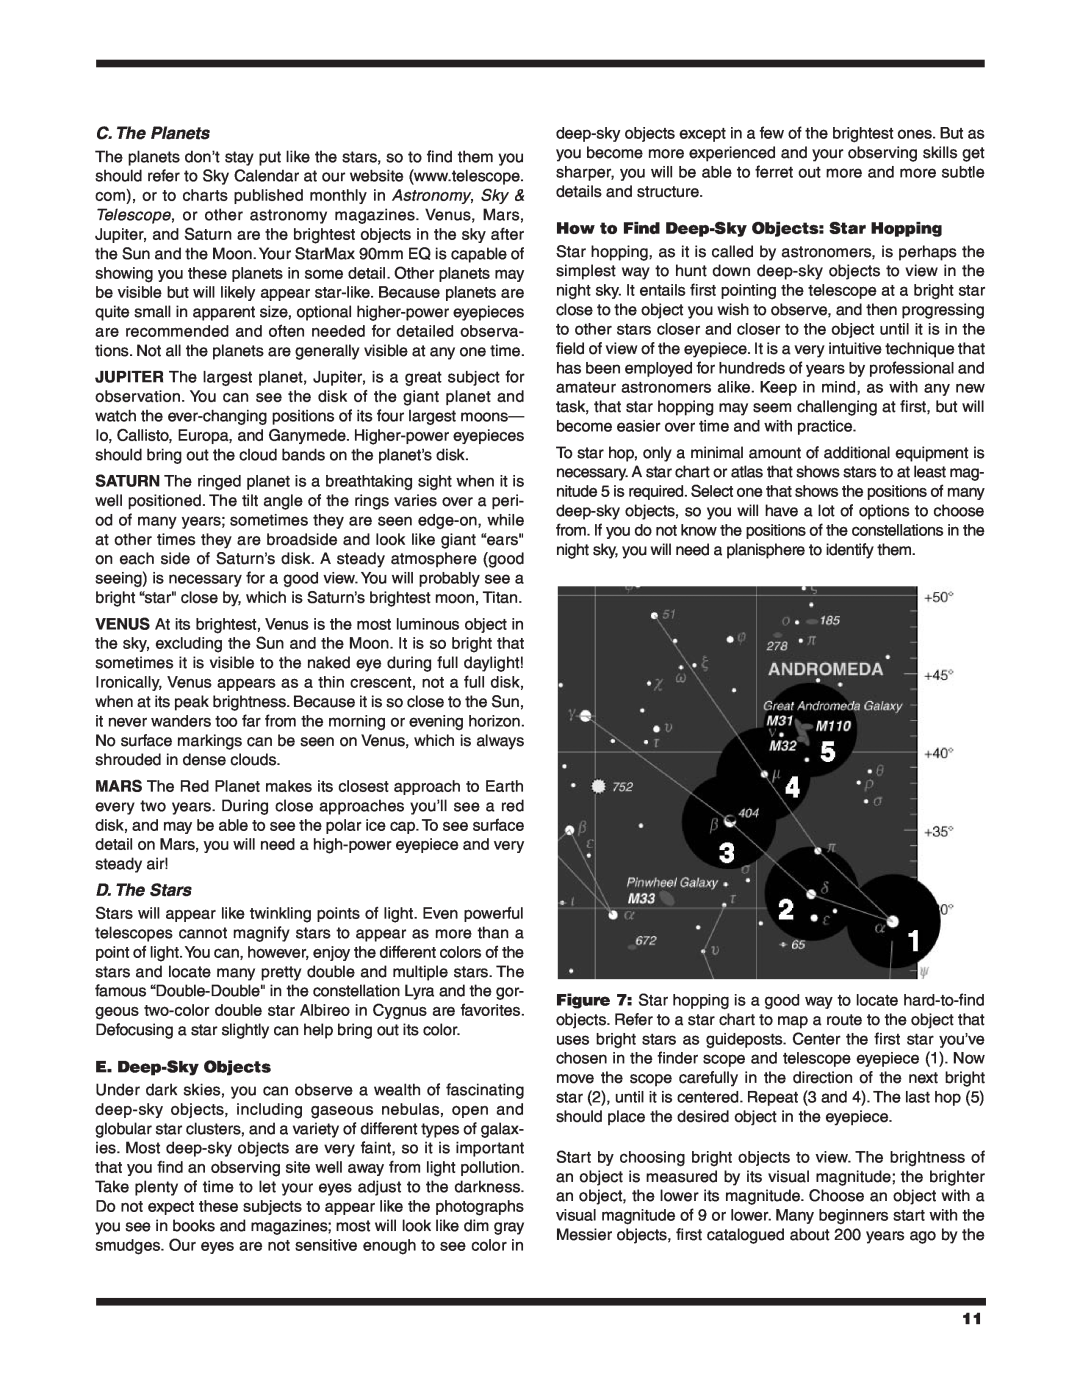 Orion 90 EQ instruction manual C. The Planets, D. The Stars, E. Deep-Sky Objects, How to Find Deep-Sky Objects Star Hopping 